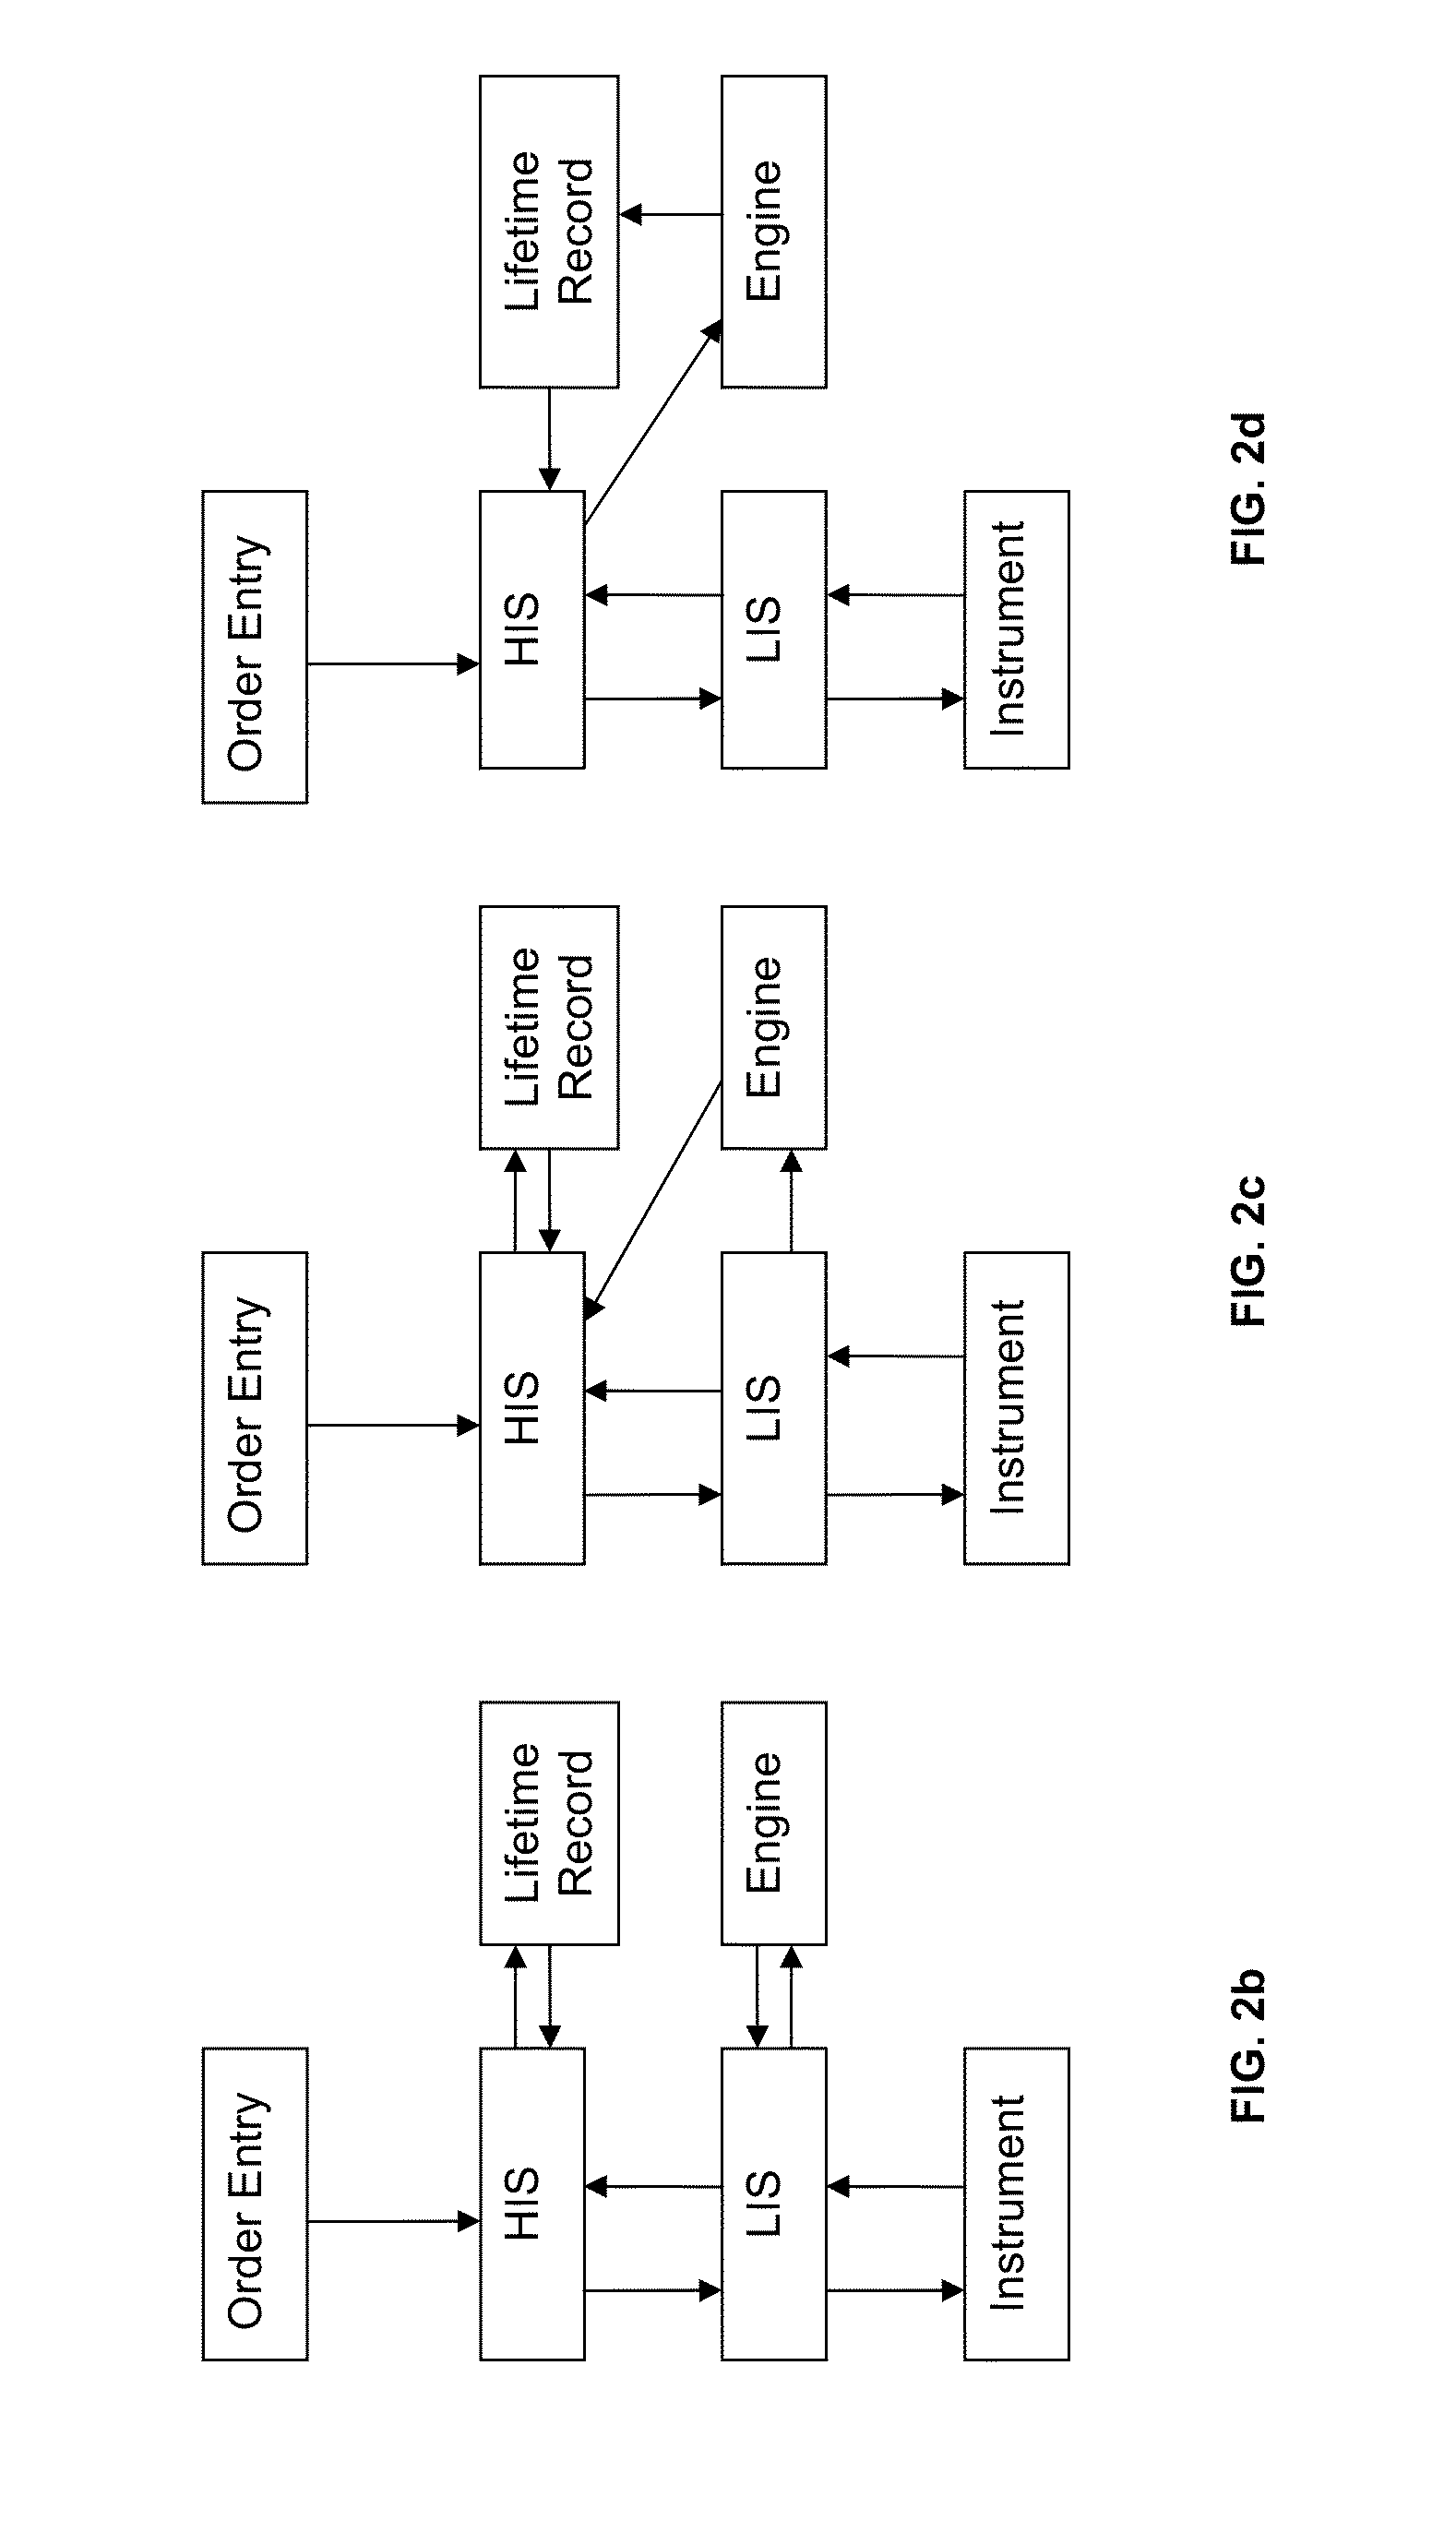 Method for normalizing clinical laboratory measurements